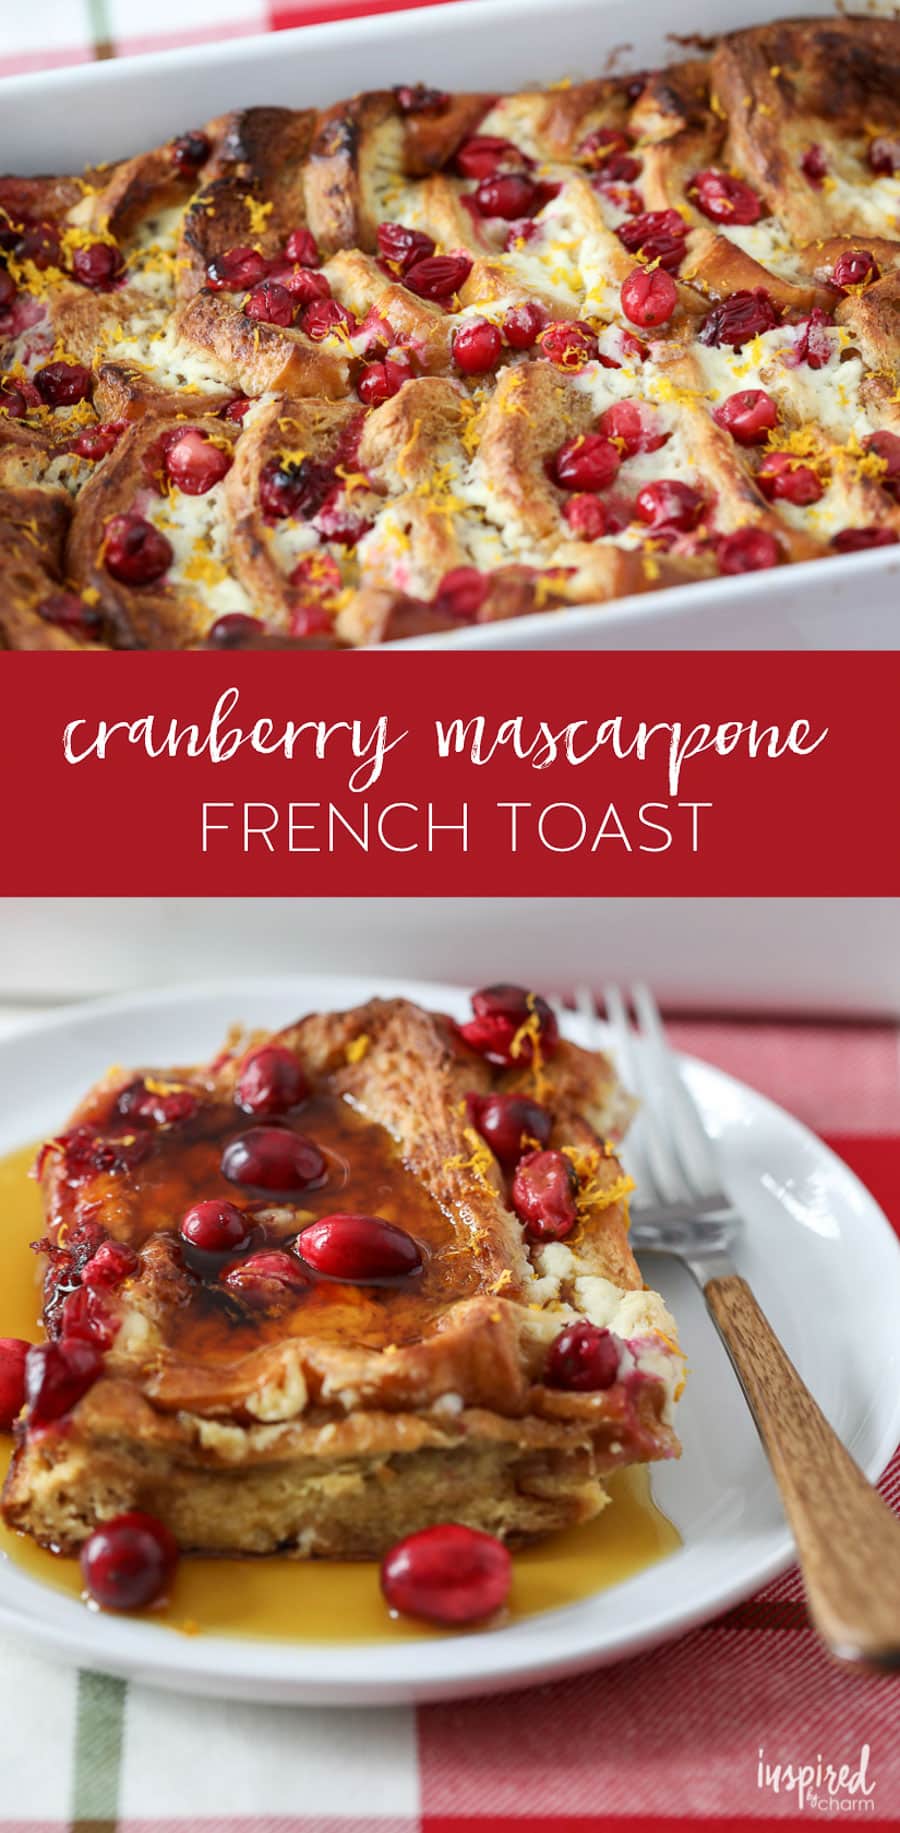 This Mascarpone Cranberry French Toast recipe makes the perfect holiday breakfast! #breakfast #recipe #frenchtoast #cranberry #mascarpone #holiday #christmas